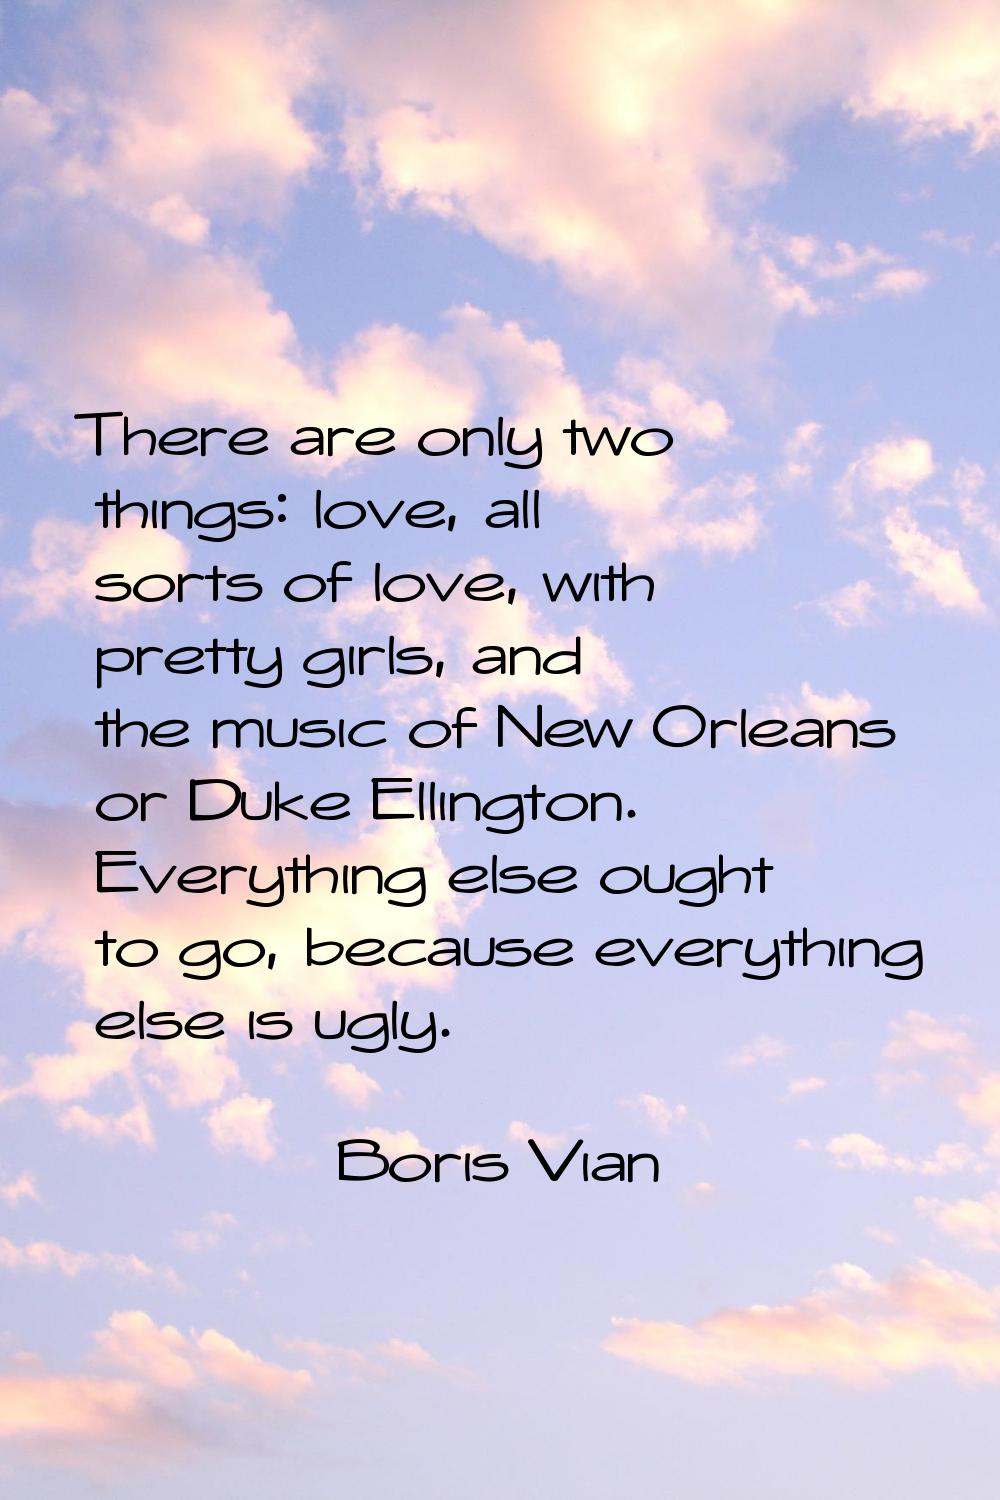 There are only two things: love, all sorts of love, with pretty girls, and the music of New Orleans